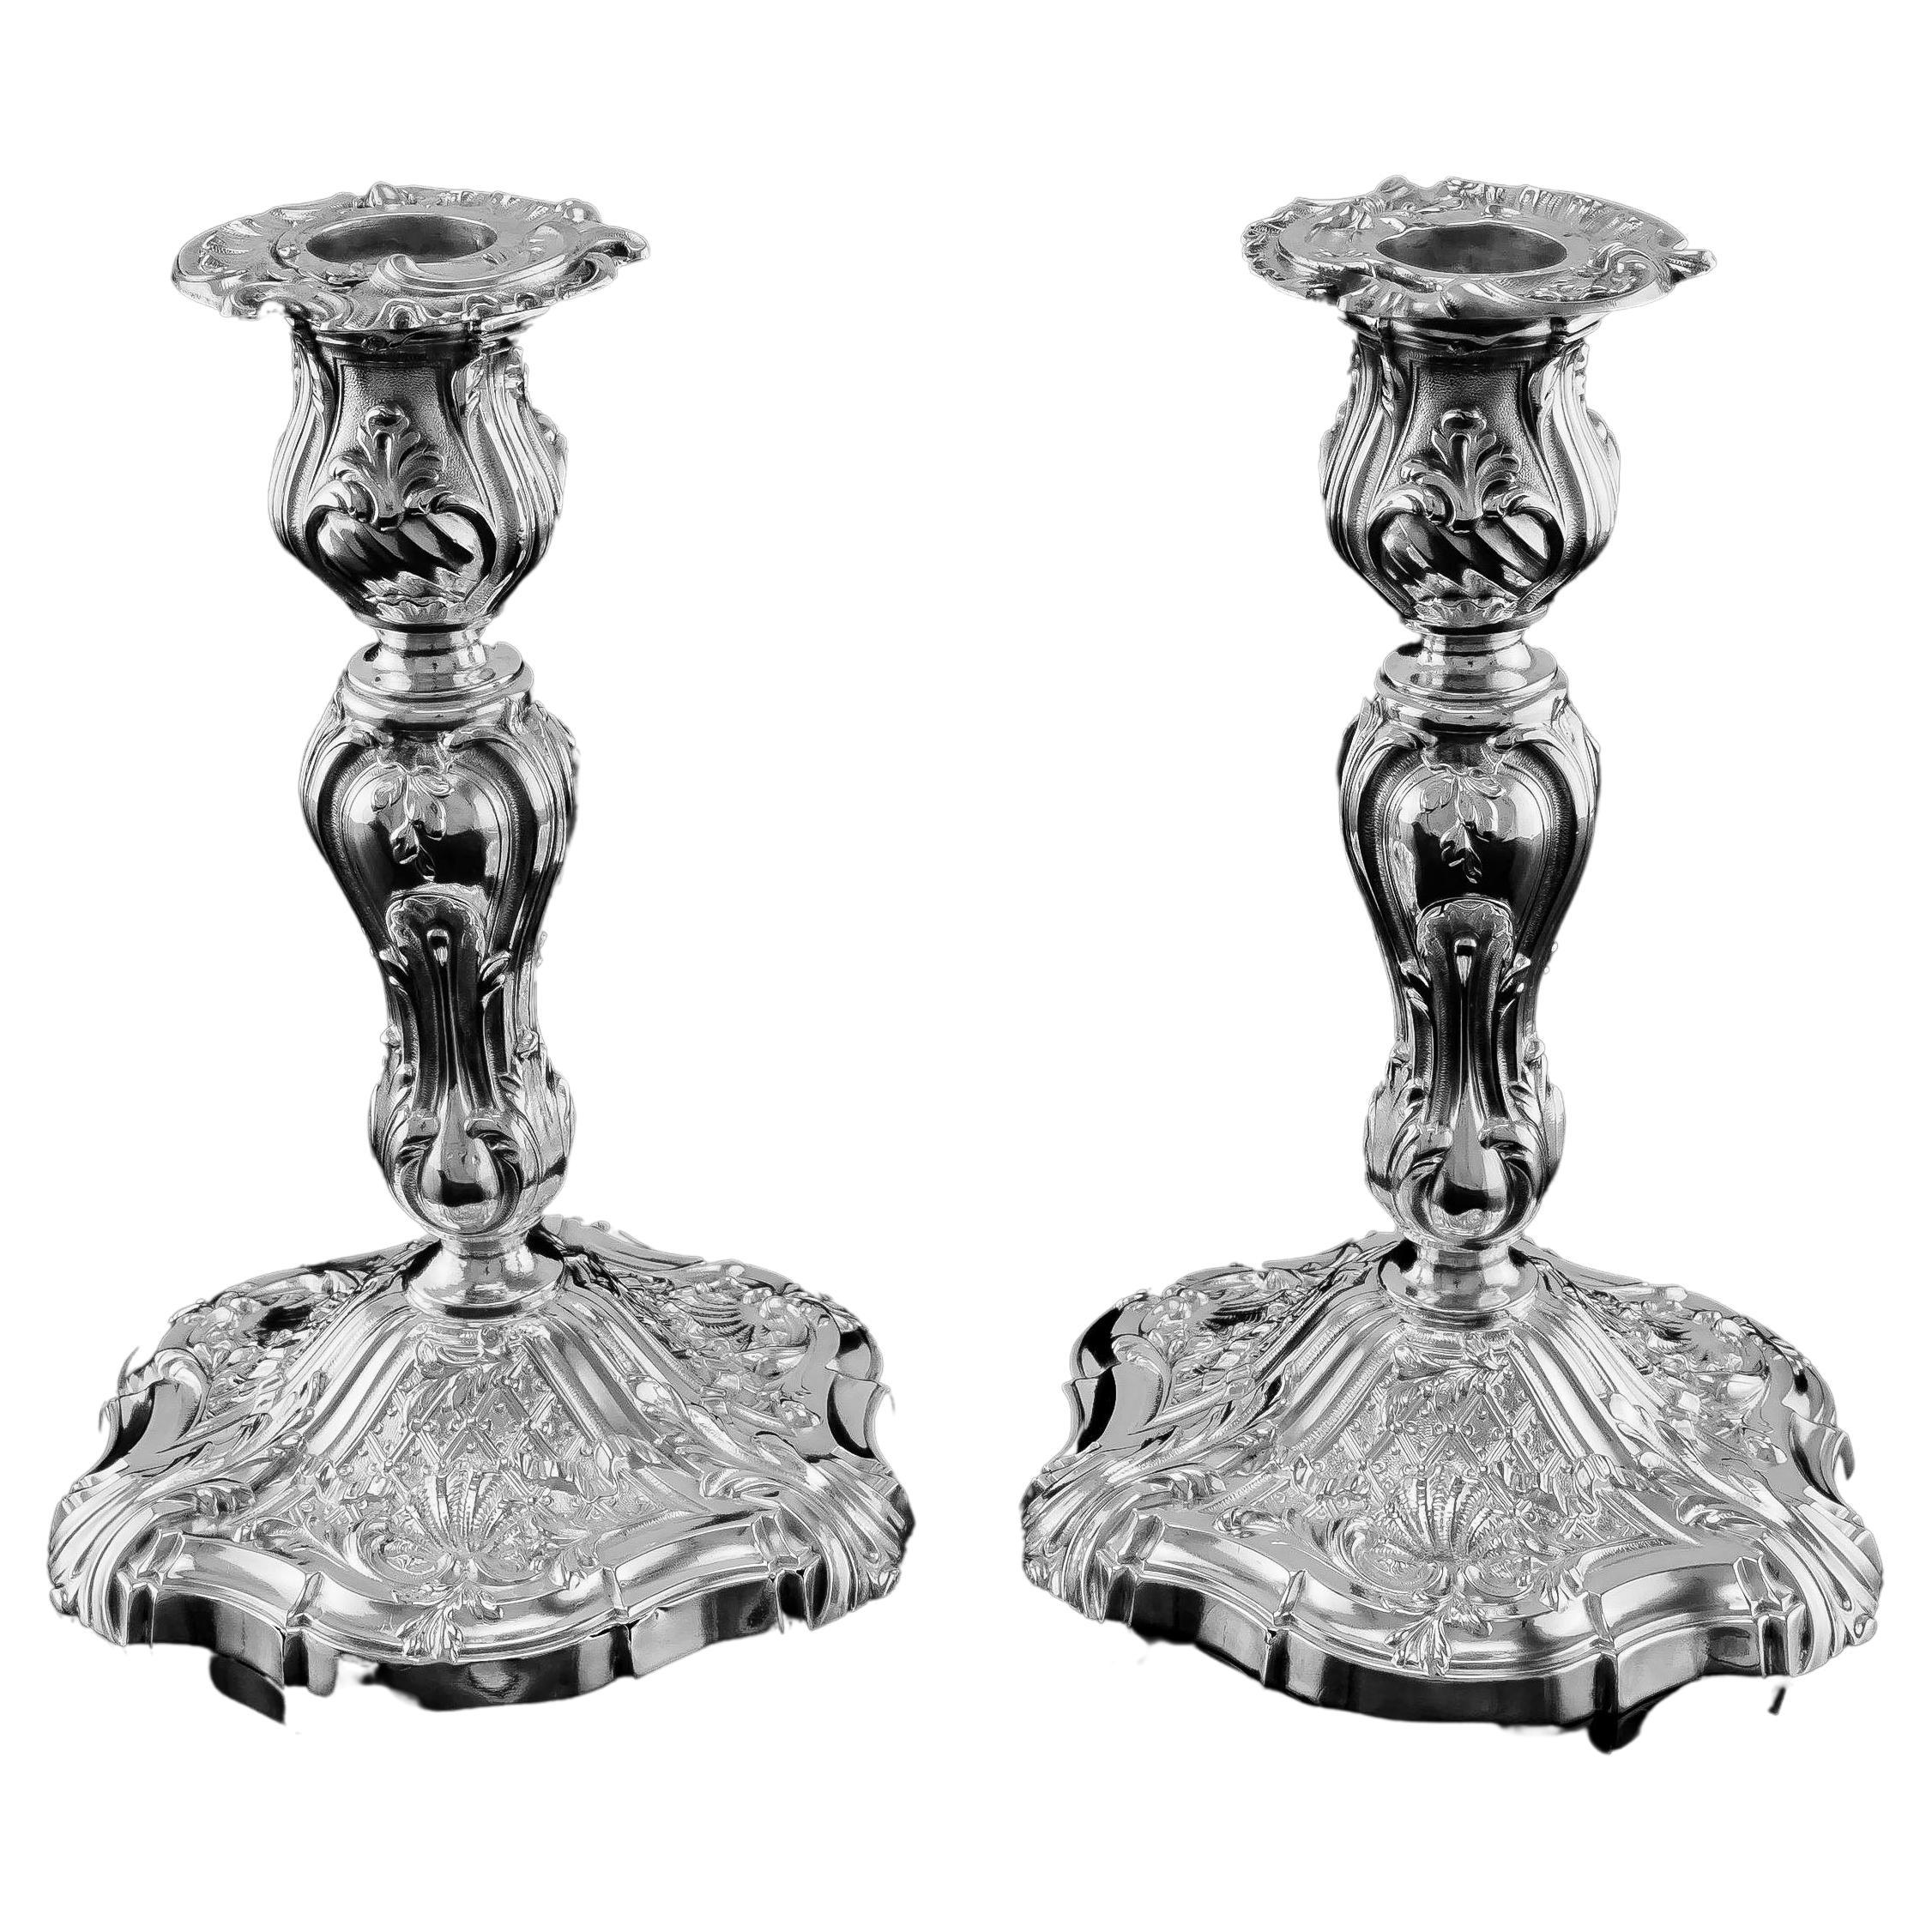 Antique Solid Silver Pair of Rococo Style Candlesticks, 1890